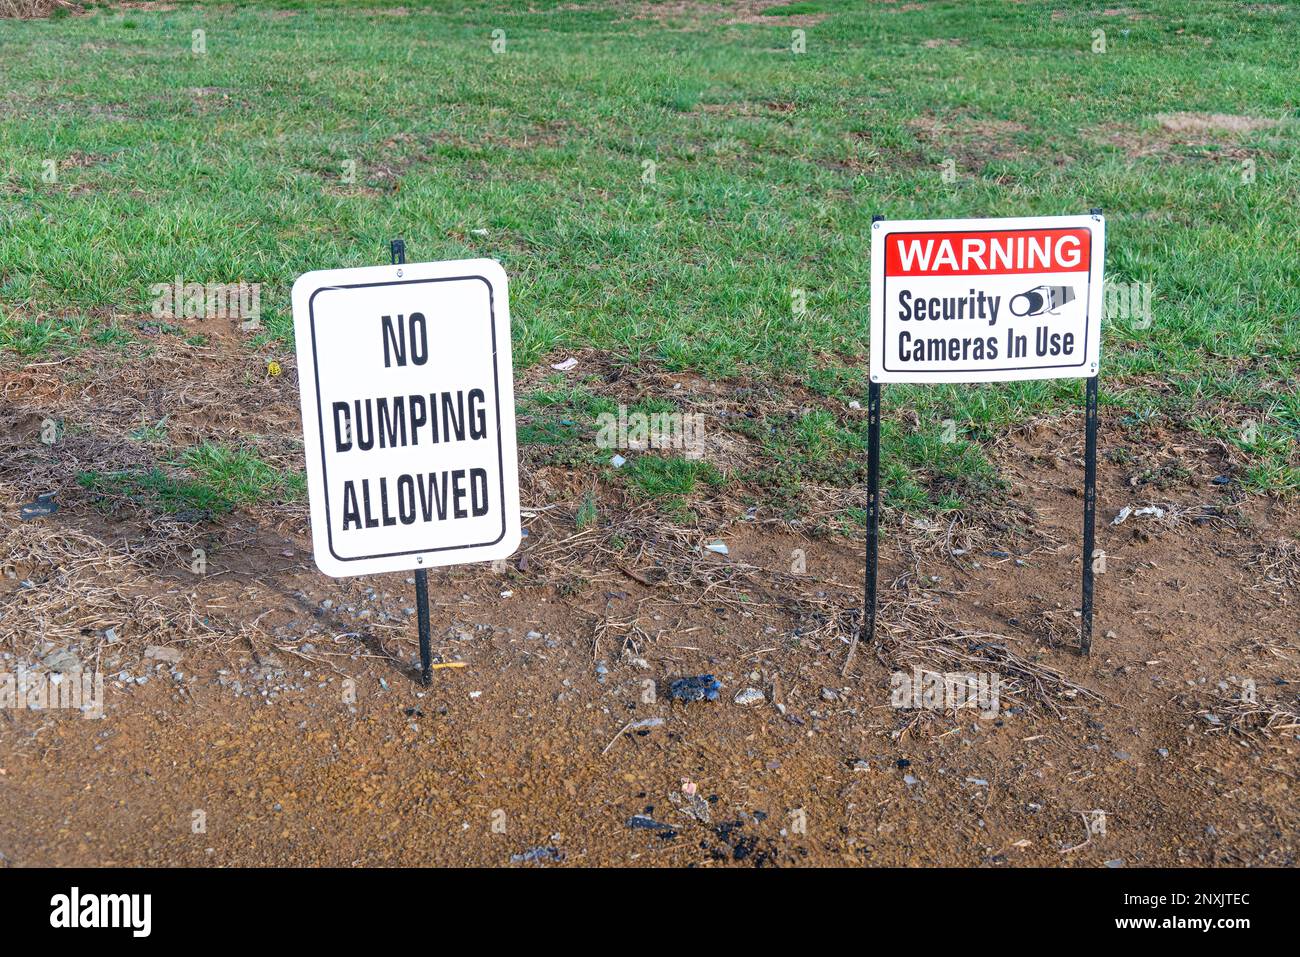 Horizontal shot of a No Dumping Allowed sign and a Warning Security Cameras In Use sign in a field. Stock Photo